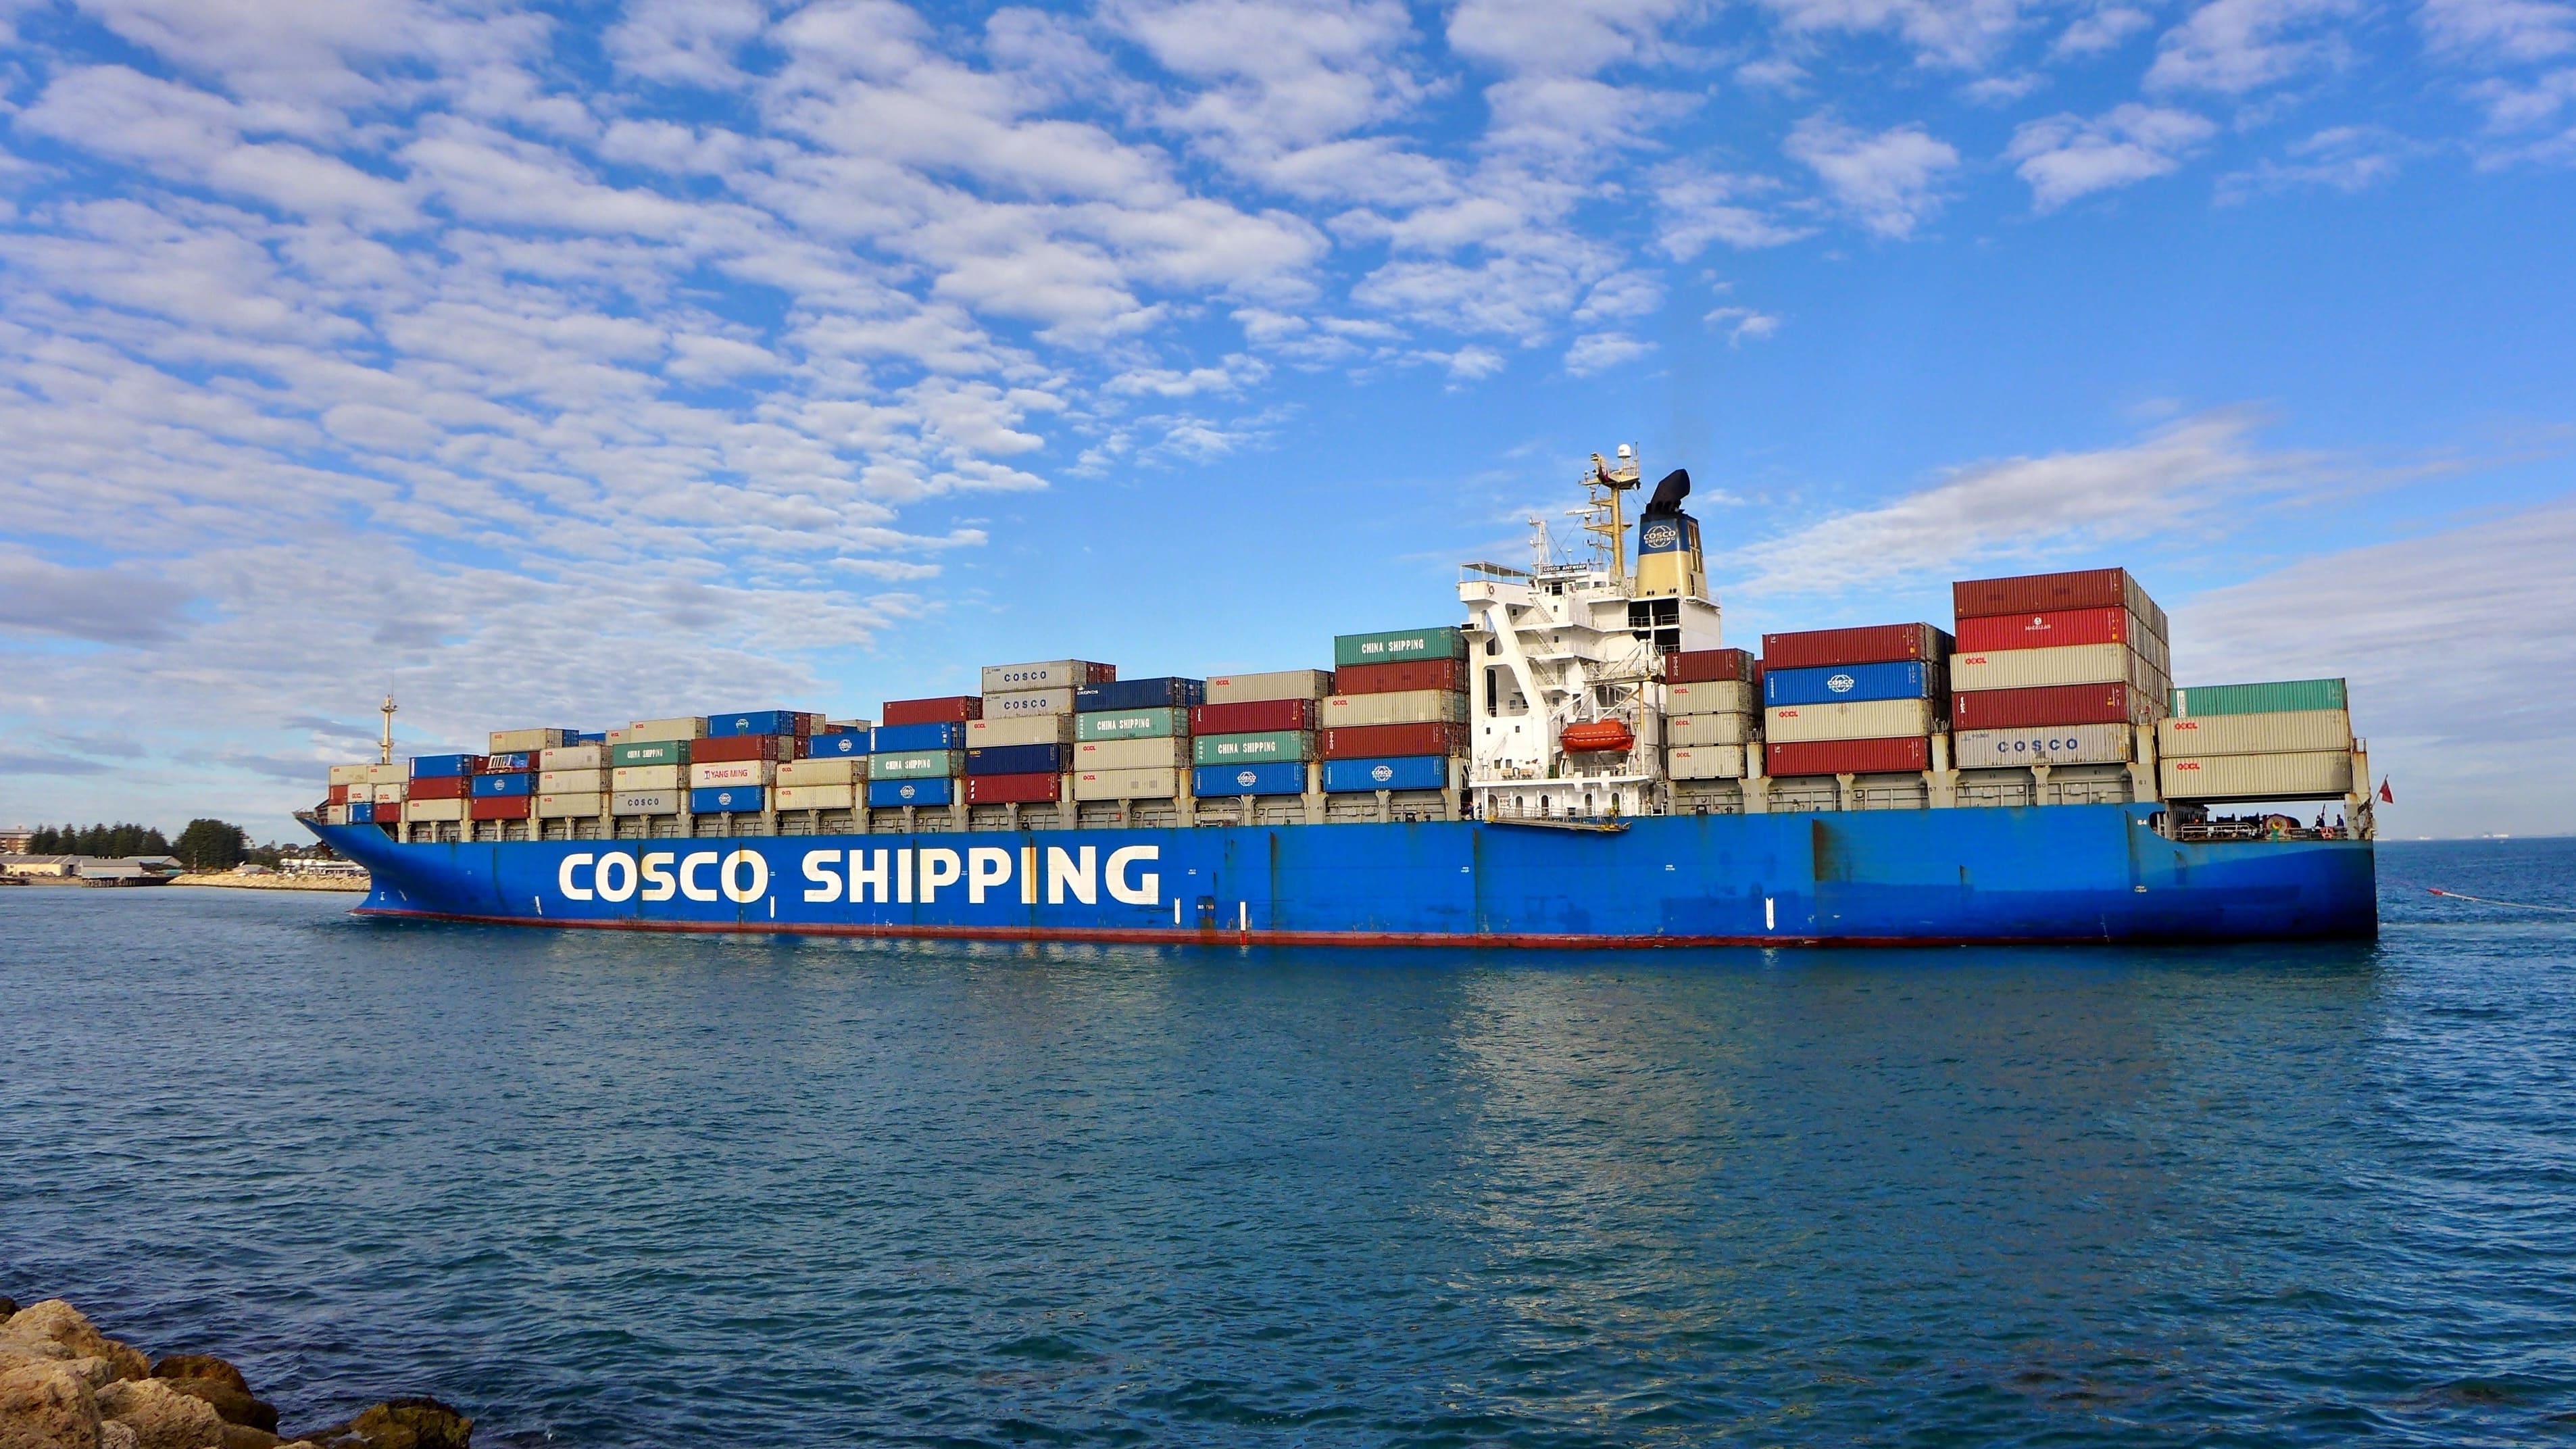 WinGD to supply methanol engines for the container ship Cosco Shipping Lines